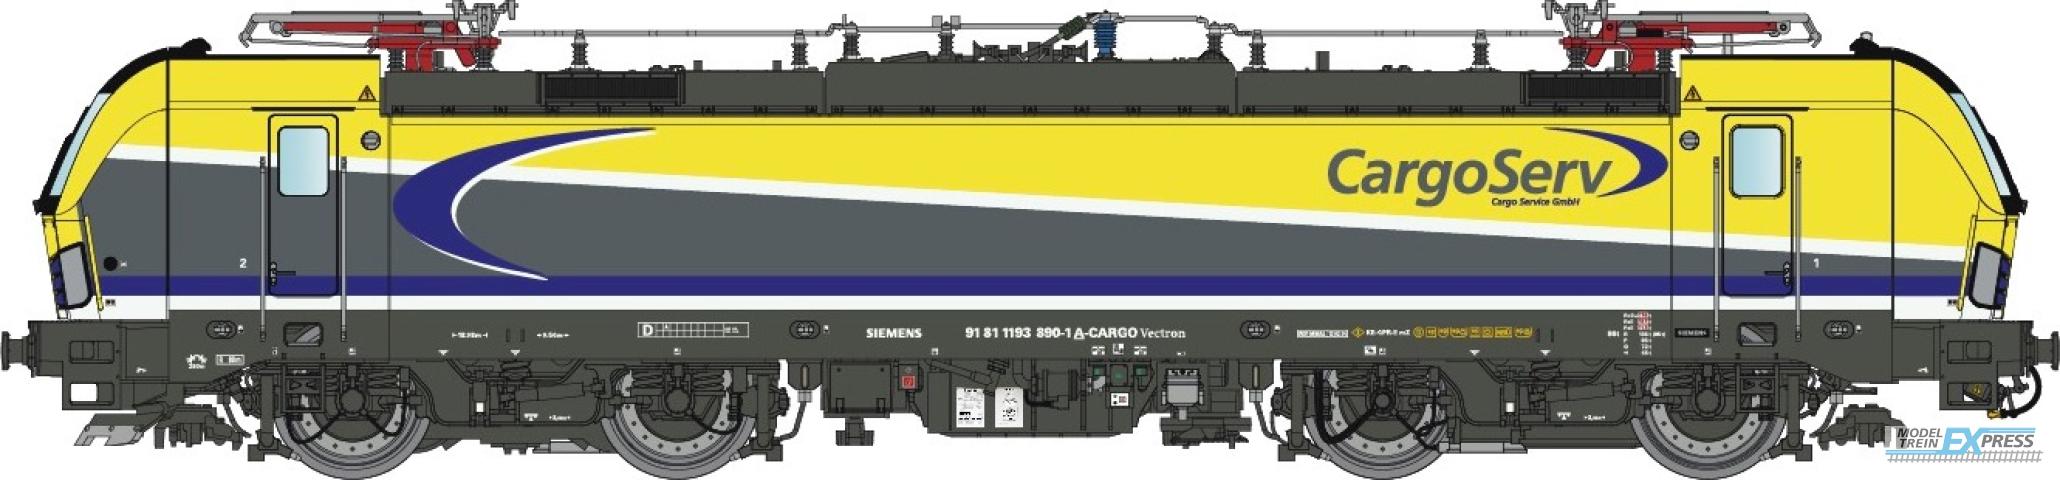 LS Models 18505S A-CARGO, yellow/silver, blue lines, CargoServ, Ep.VI  /  Ep. ---  /  ---  /  ---  /  ---  /  ---